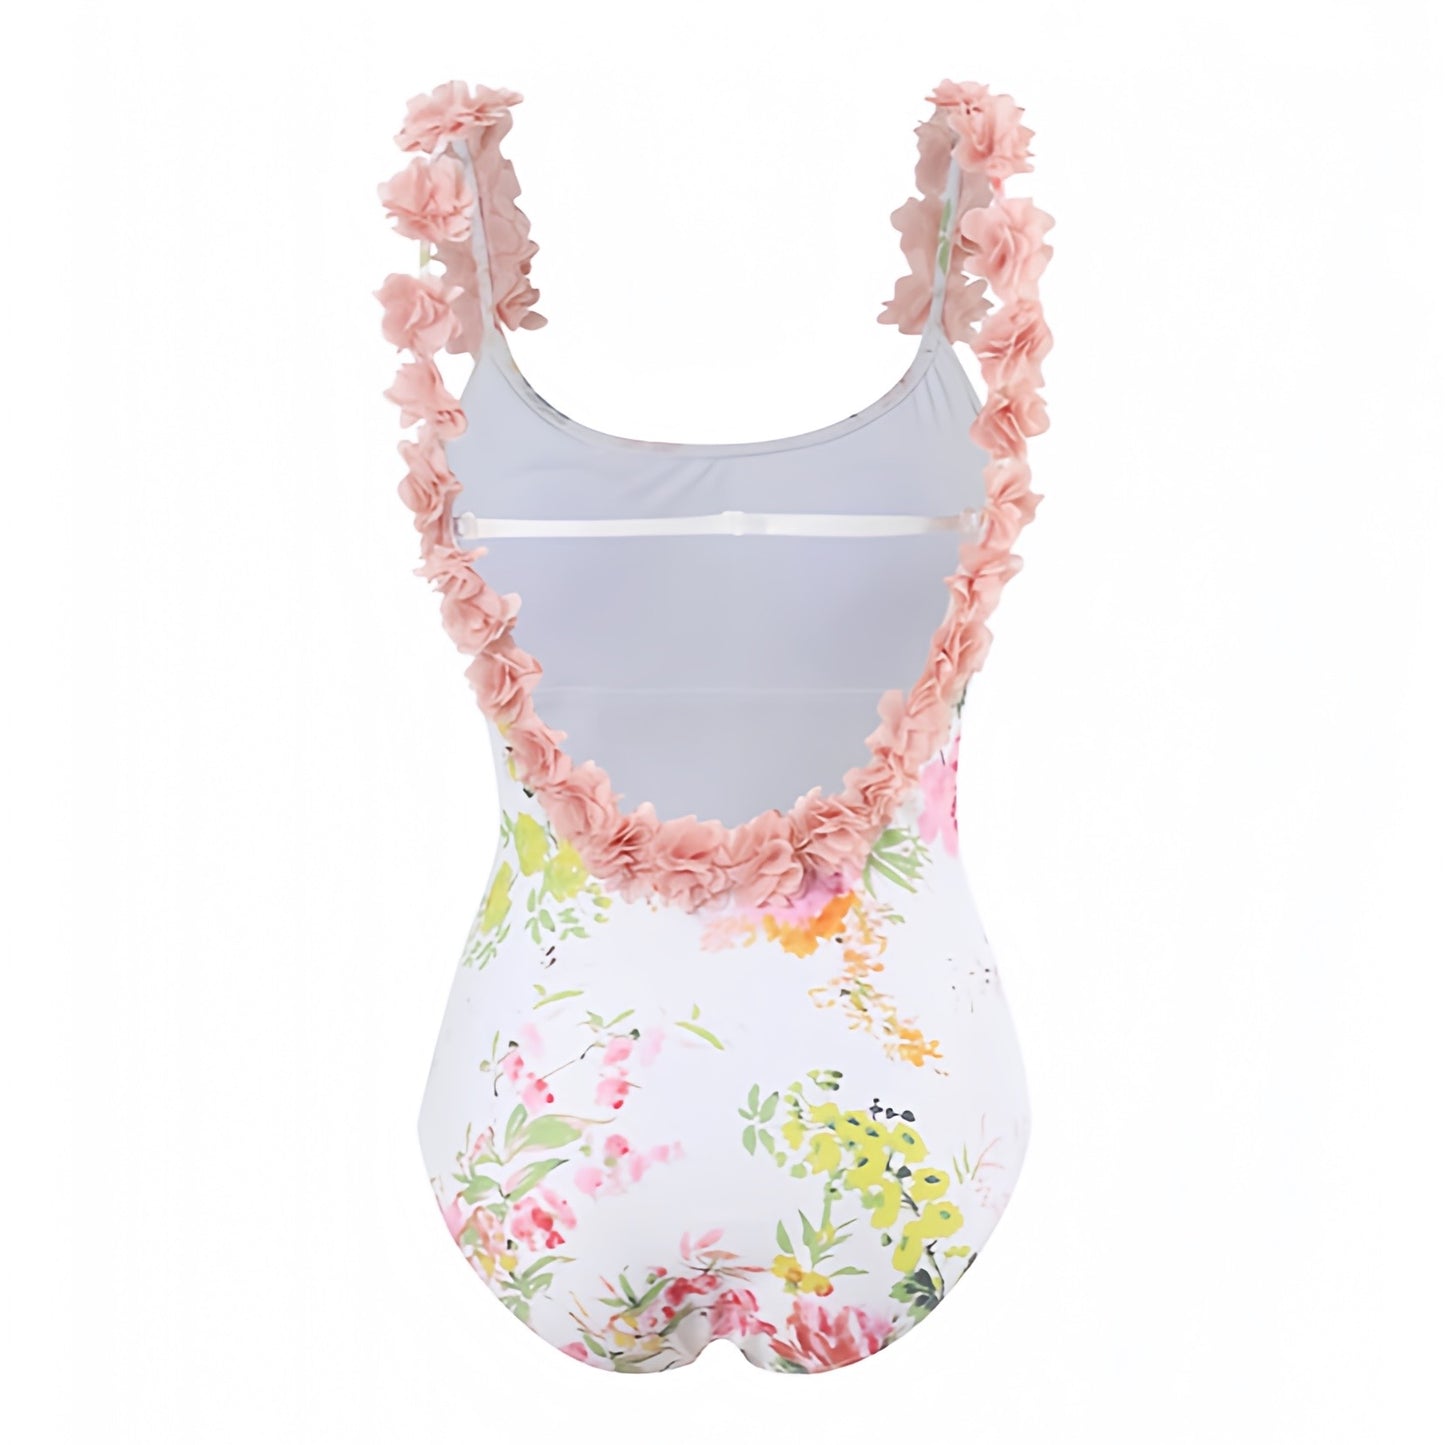 floral-print-light-pink-white-yellow-green-orange-multi-color-flower-patterned-slim-fit-bodycon-ruffle-trim-round-neckline-spaghetti-strap-backless-open-back-wireless-push-up-cheeky-thong-boho-bohemian-couture-one-piece-swimsuit-swimwear-bathing-suit-women-ladies-teens-tweens-chic-trendy-spring-2024-summer-elegant-feminine-preppy-style-tropical-vacation-beach-wear-revolve-altard-state-loveshackfancy-frankies-bikinis-blackbough-kulakinis-fillyboo-dupe